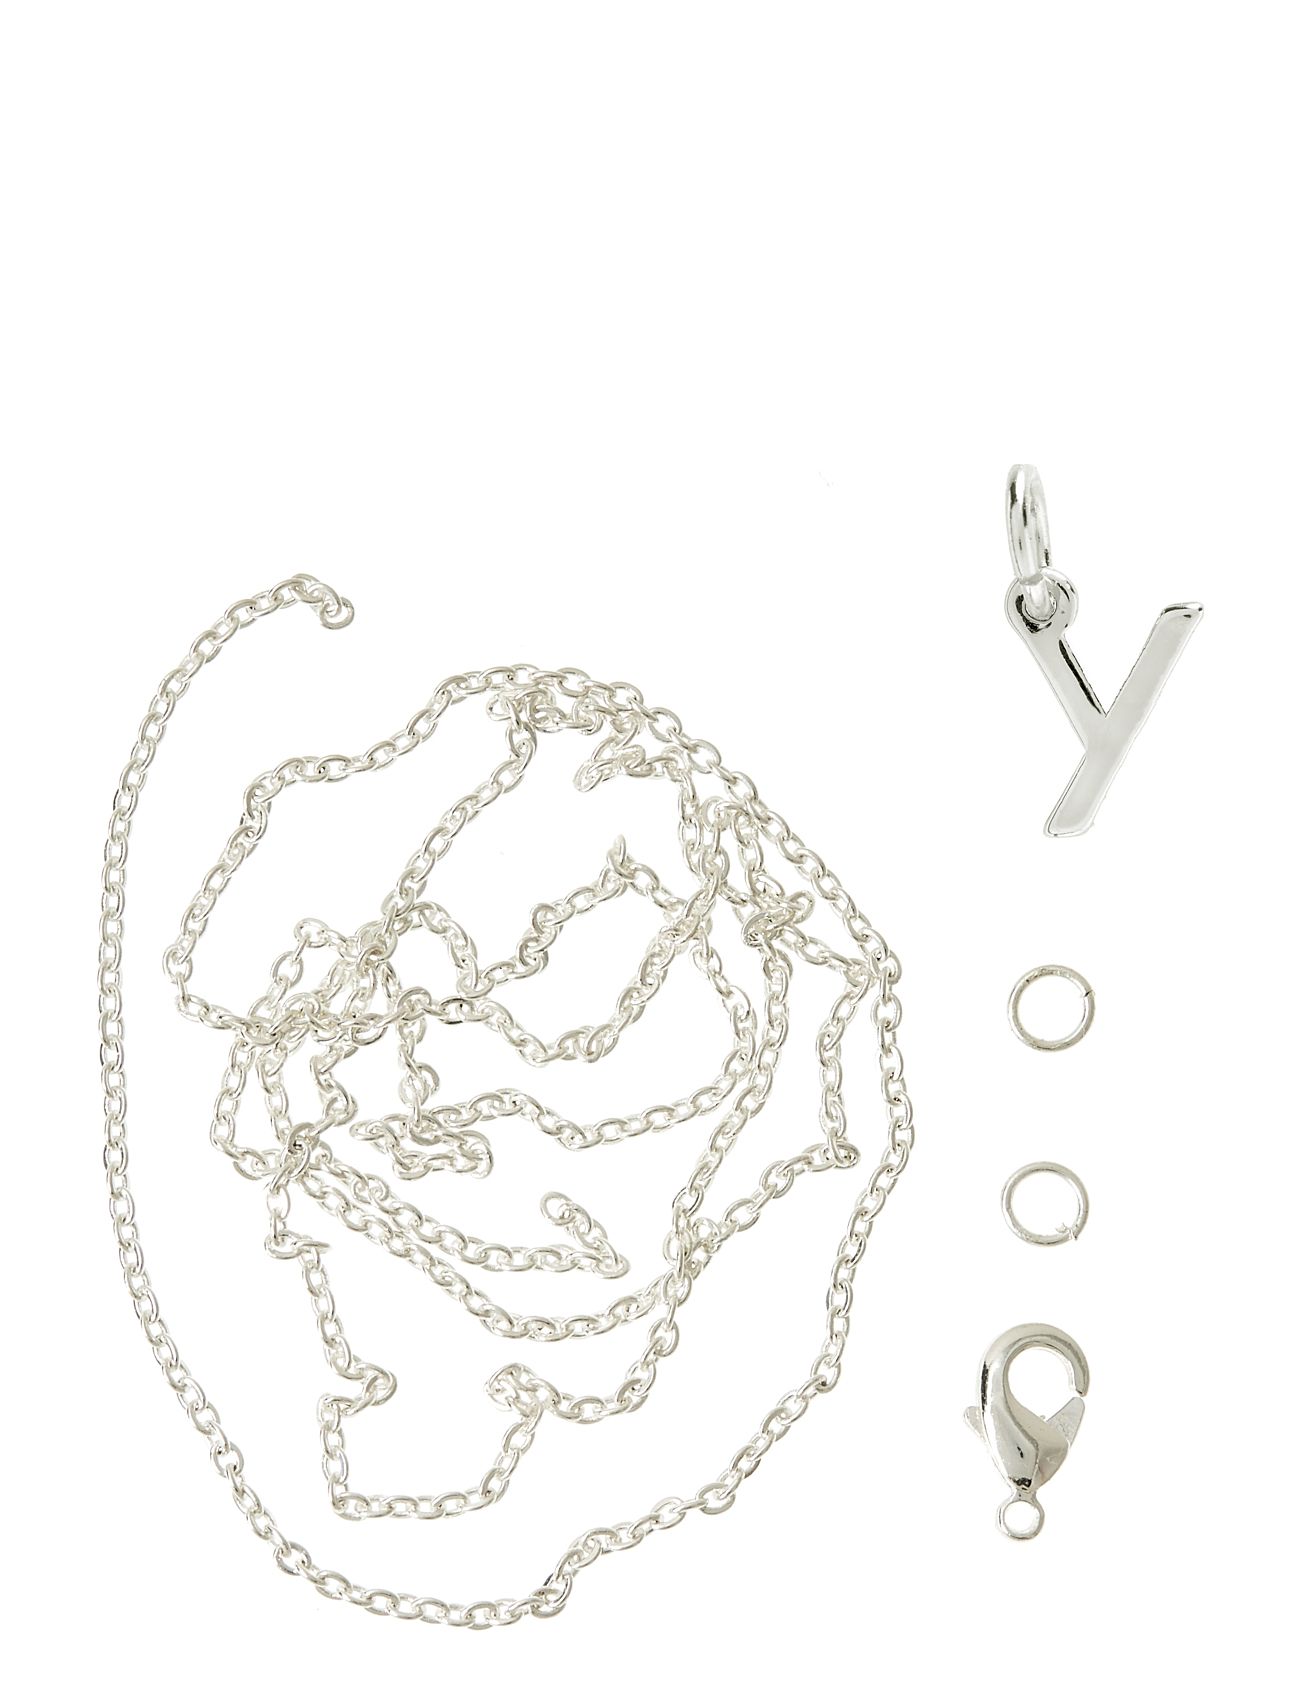 Letter Y Sp With O-Ring Chain And Clasp Toys Creativity Drawing & Crafts Craft Jewellery & Accessories Silver Me & My Box